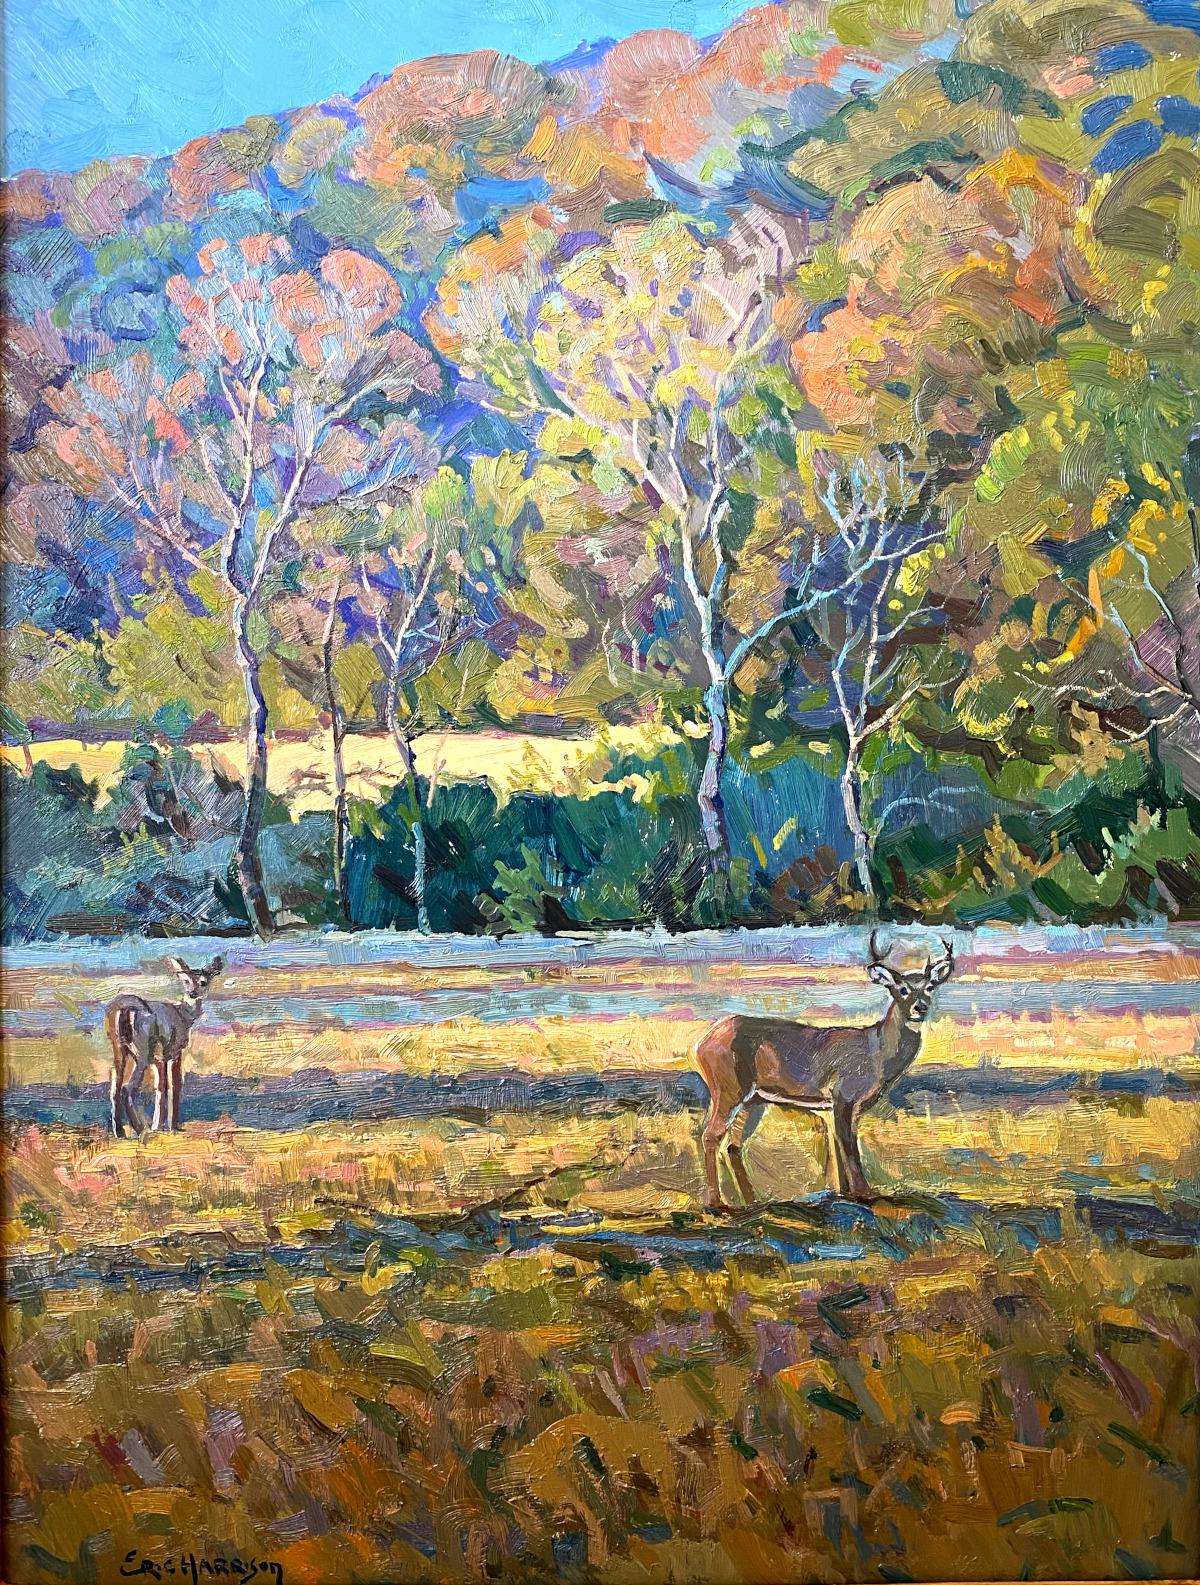 Eric Harrison Animal Painting - "HIRSCH IN HERBSTFARBEN" DEER IN FALL COLORS.  WHITE TAIL TEXAS HILL COUNTRY